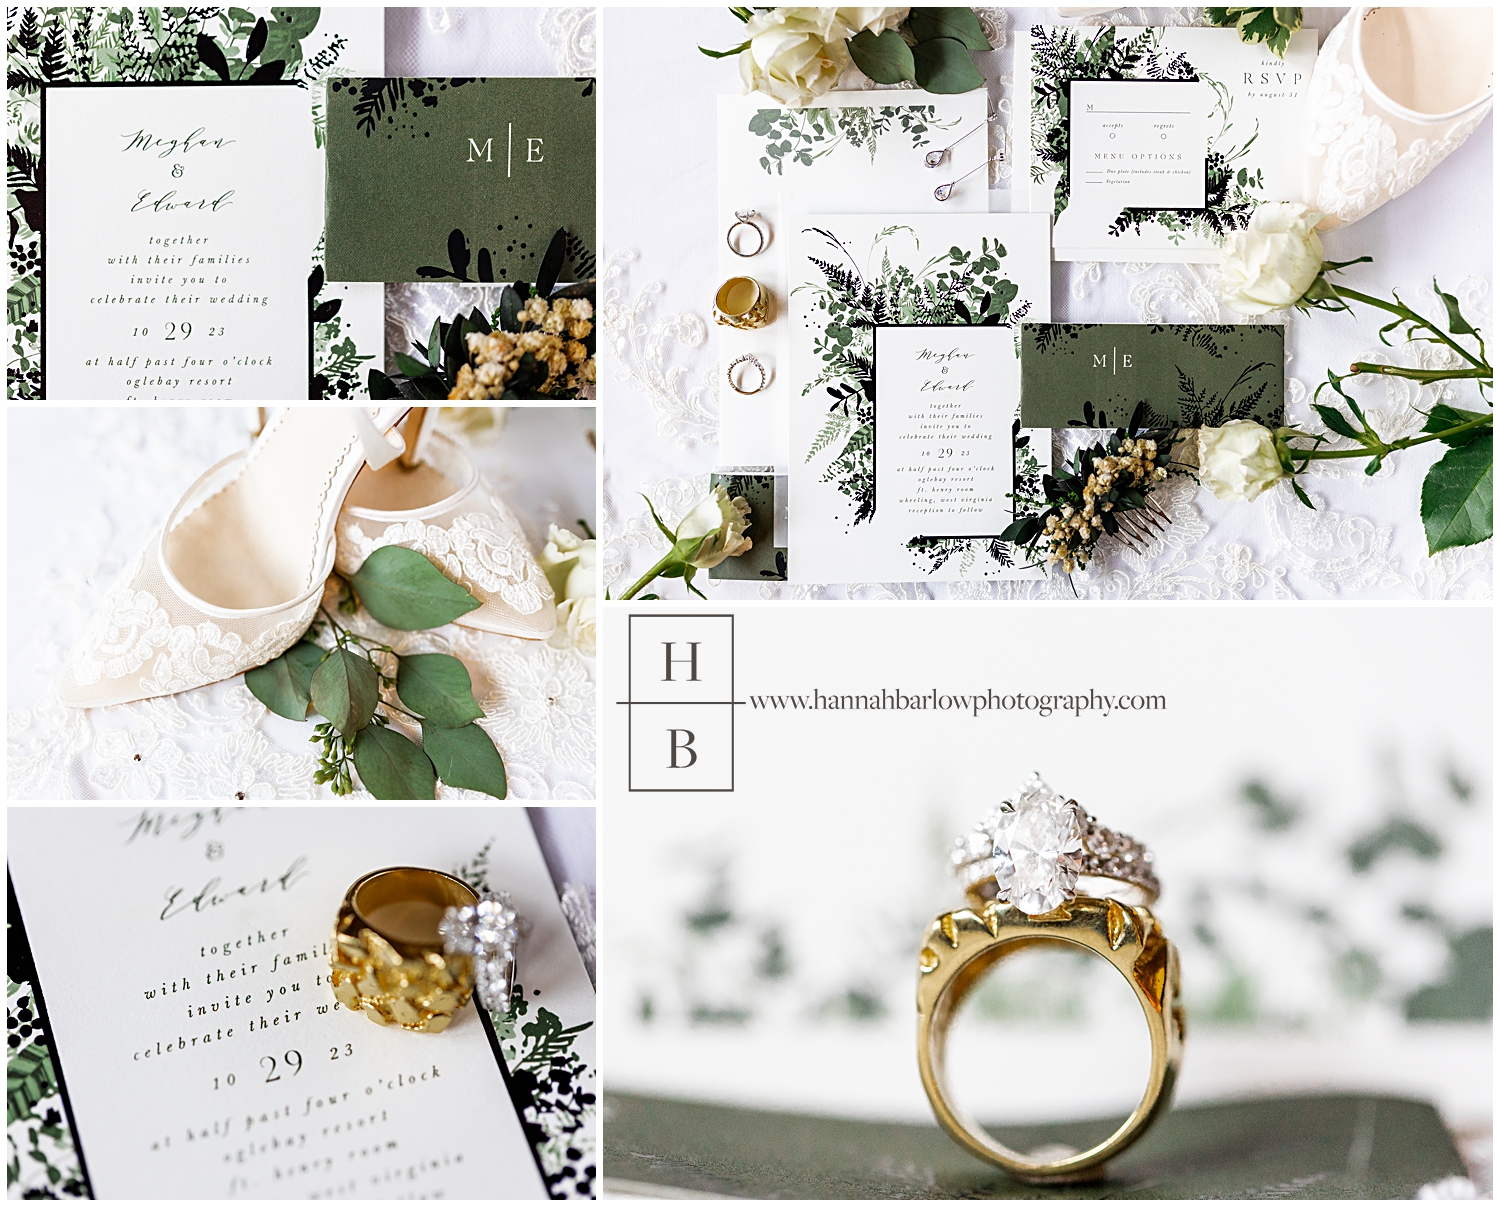 Green black and ivory wedding details are featured